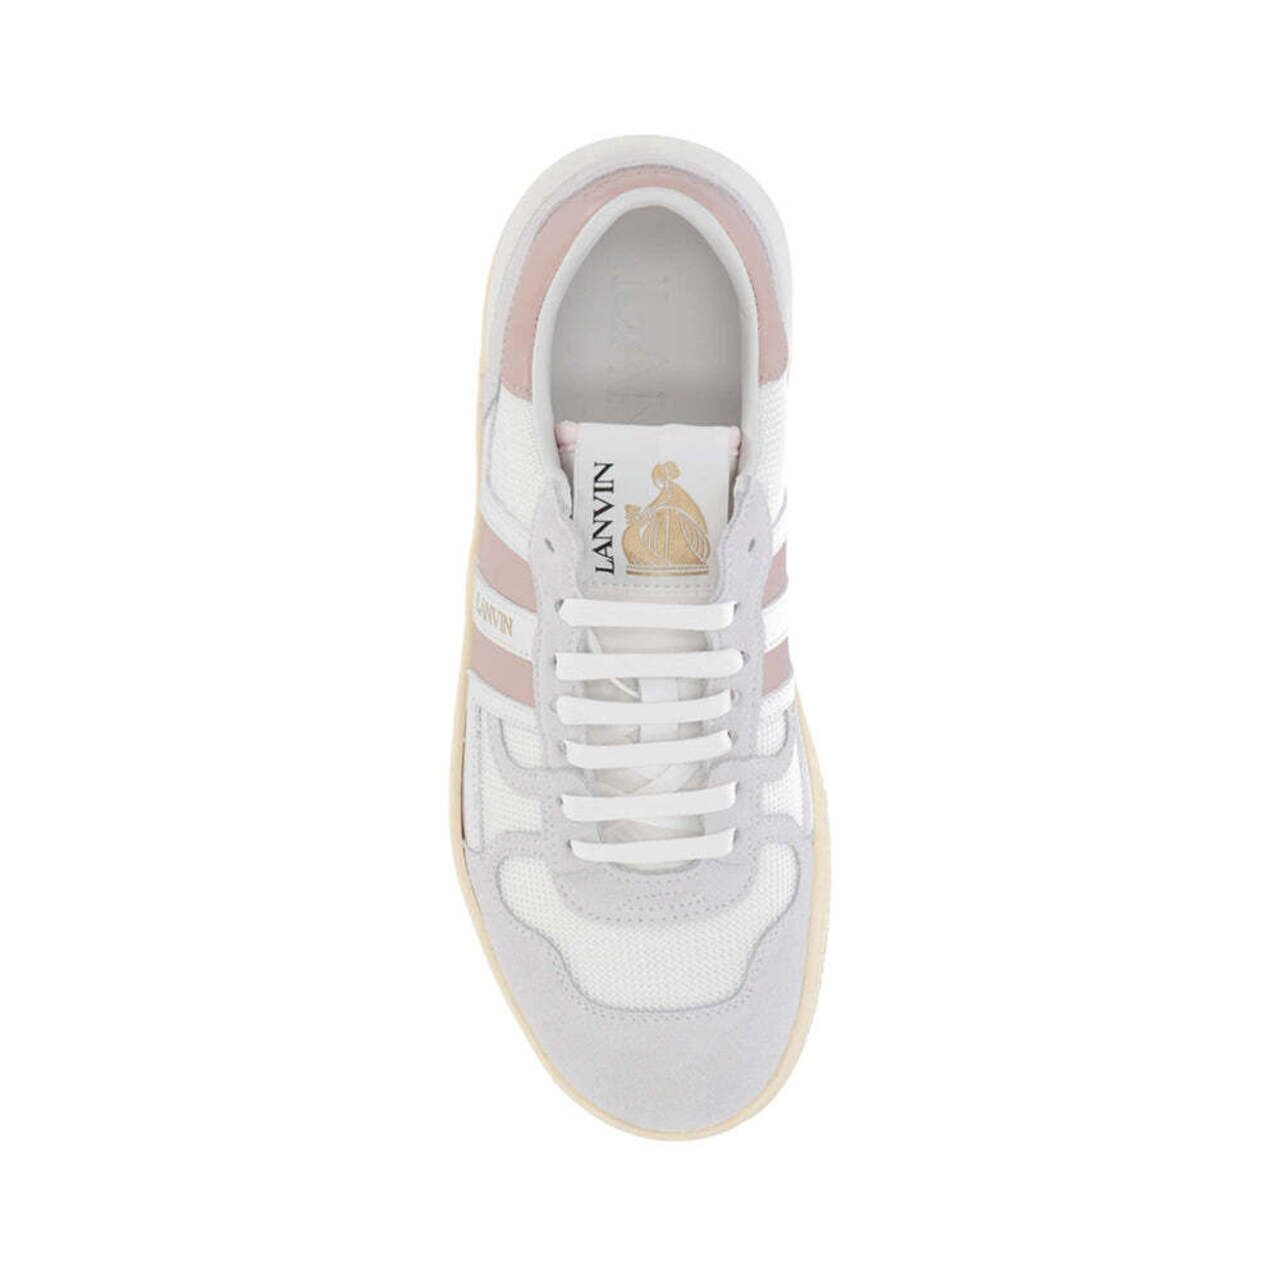 Lanvin Leather and Mesh Clay Low Top Sneakers White/Light Pink Women